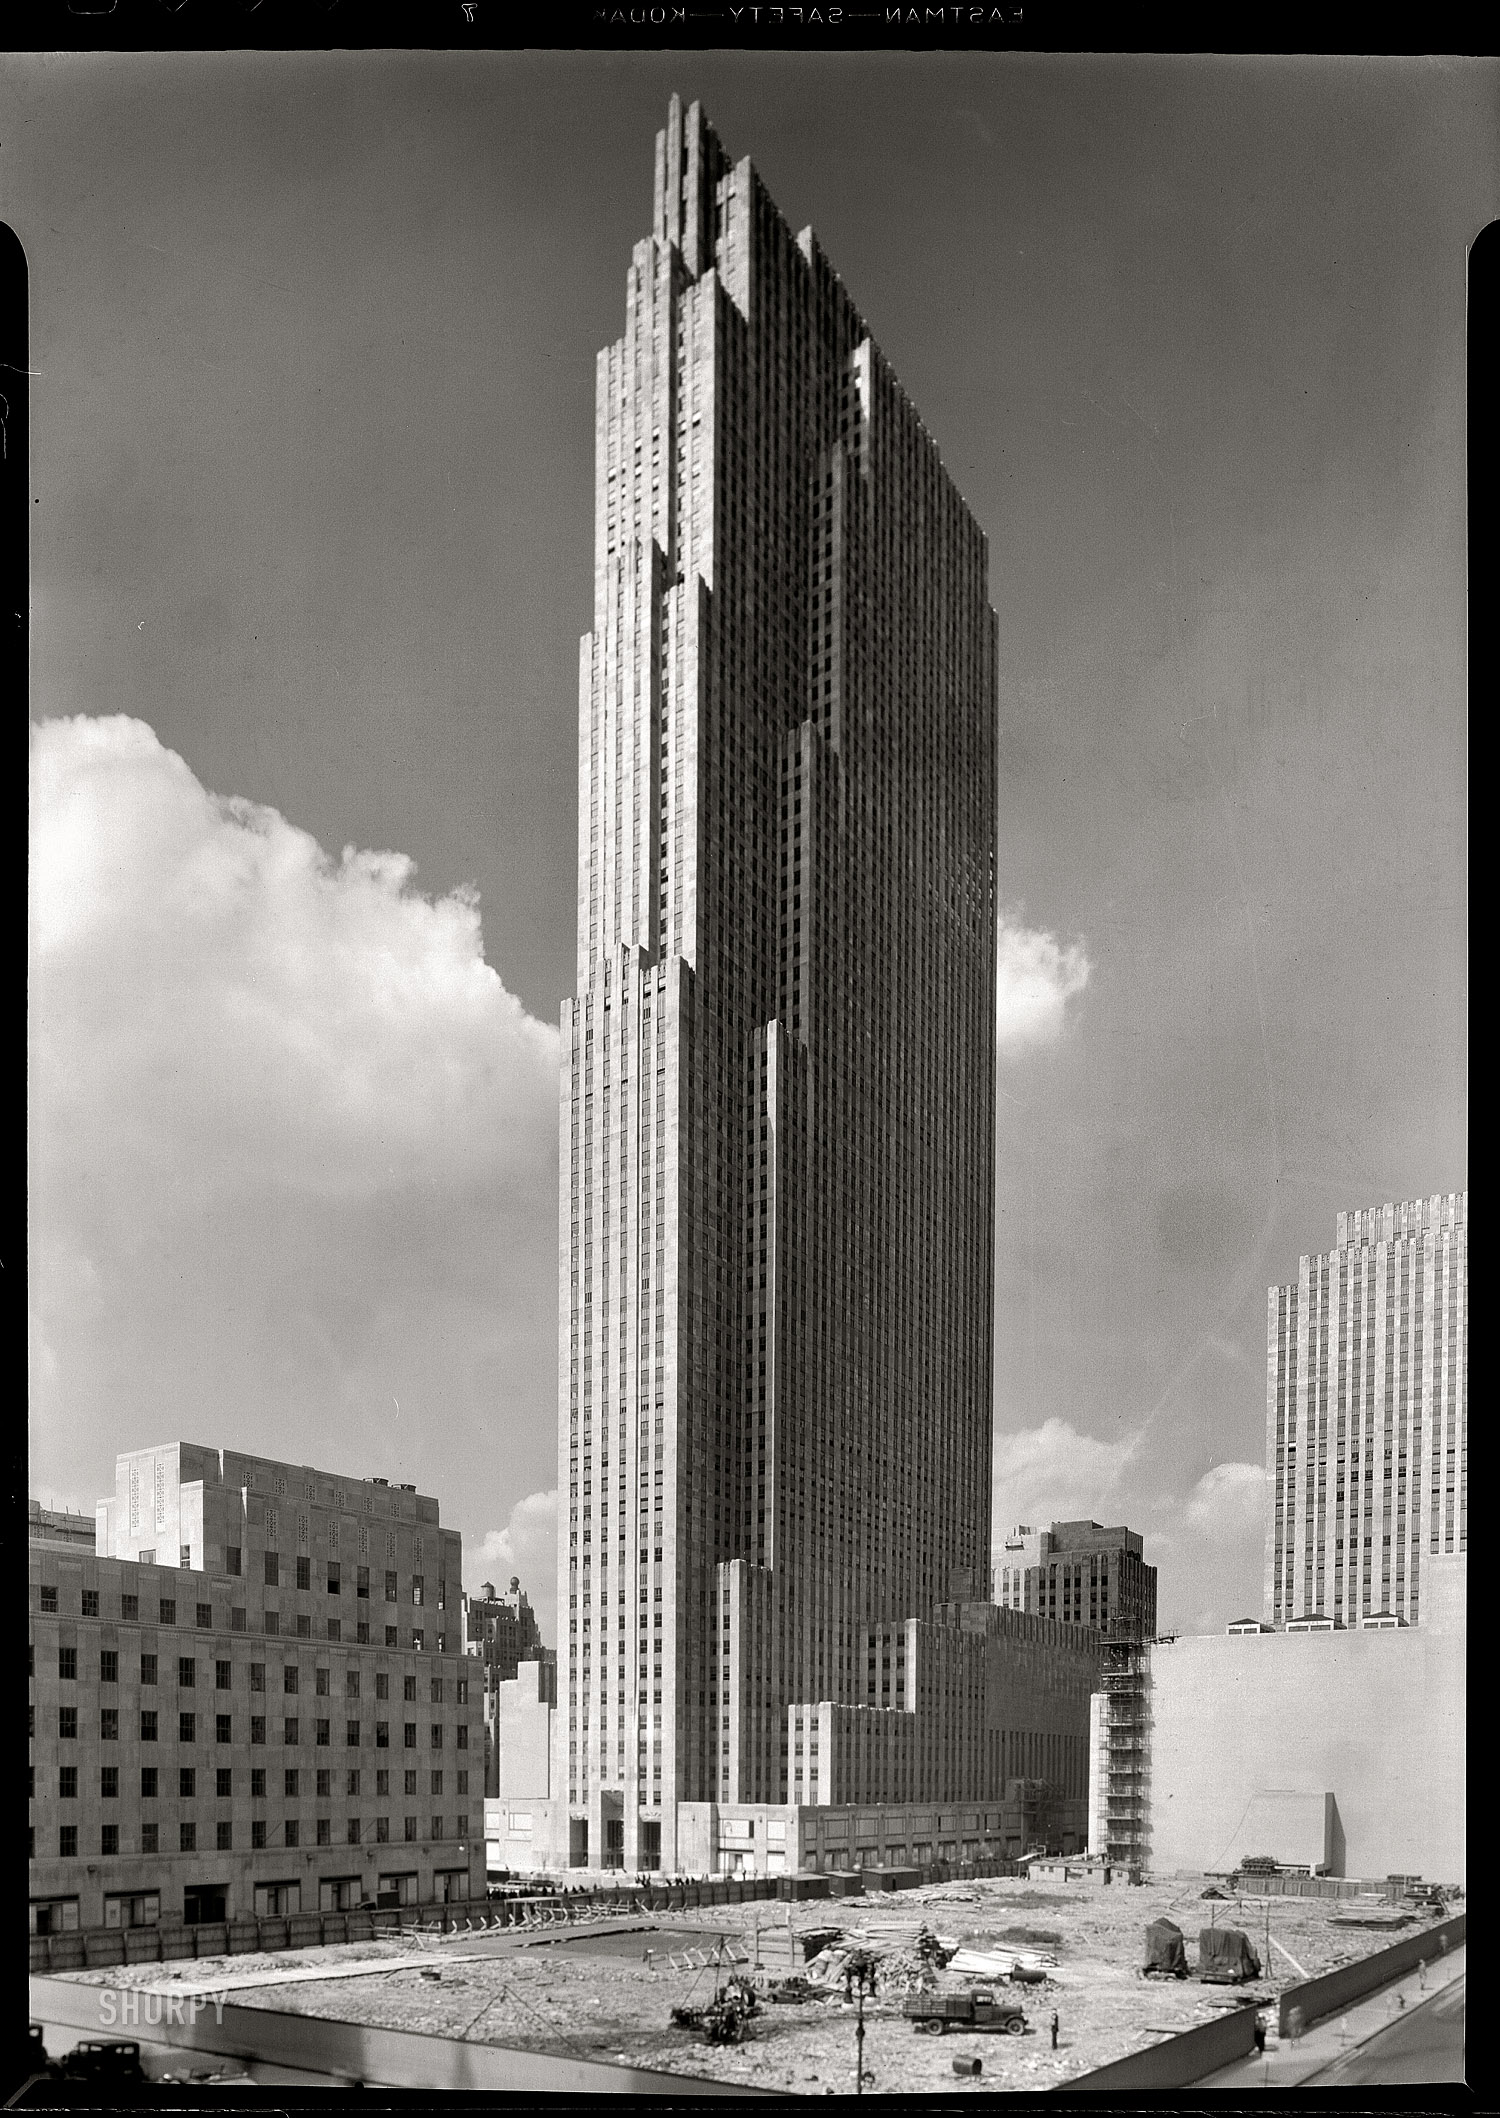 September 1, 1933. "Rockefeller Center, New York City. RCA Building, general view from the old Union Club." Our second look at 30 Rock in the past few days. 5x7 inch safety negative by Gottscho-Schleisner. View full size.